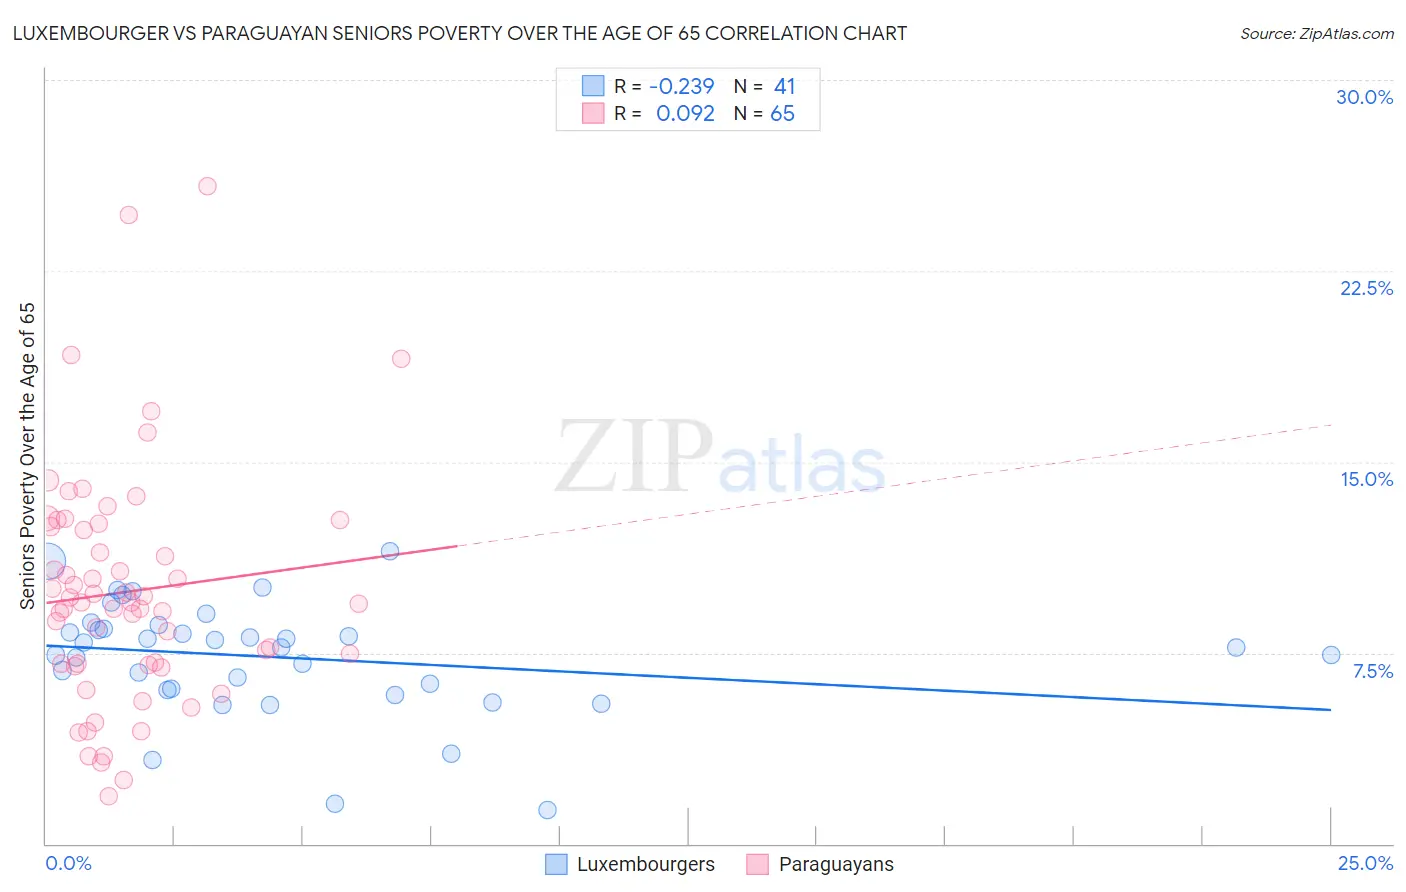 Luxembourger vs Paraguayan Seniors Poverty Over the Age of 65